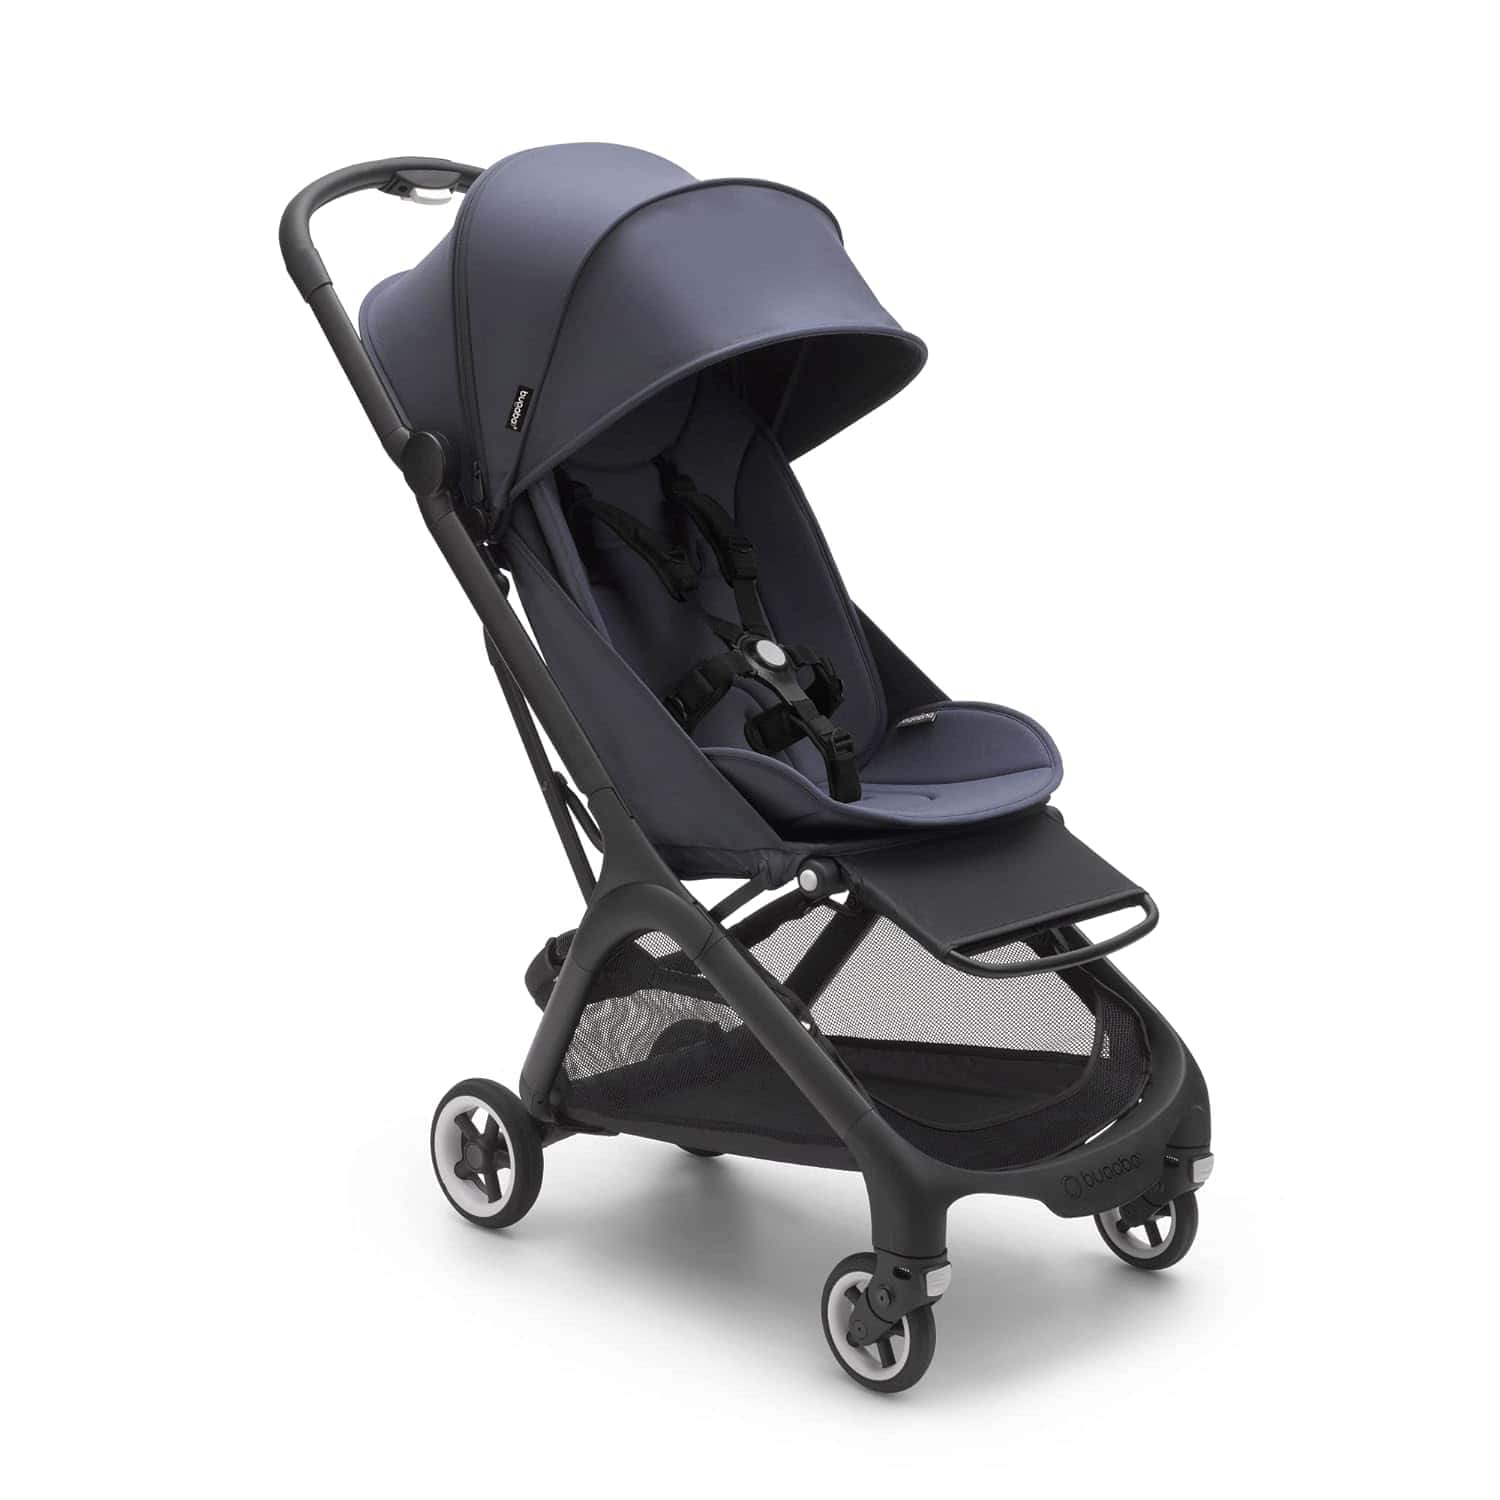 The Bugaboo Butterfly Seat Stroller